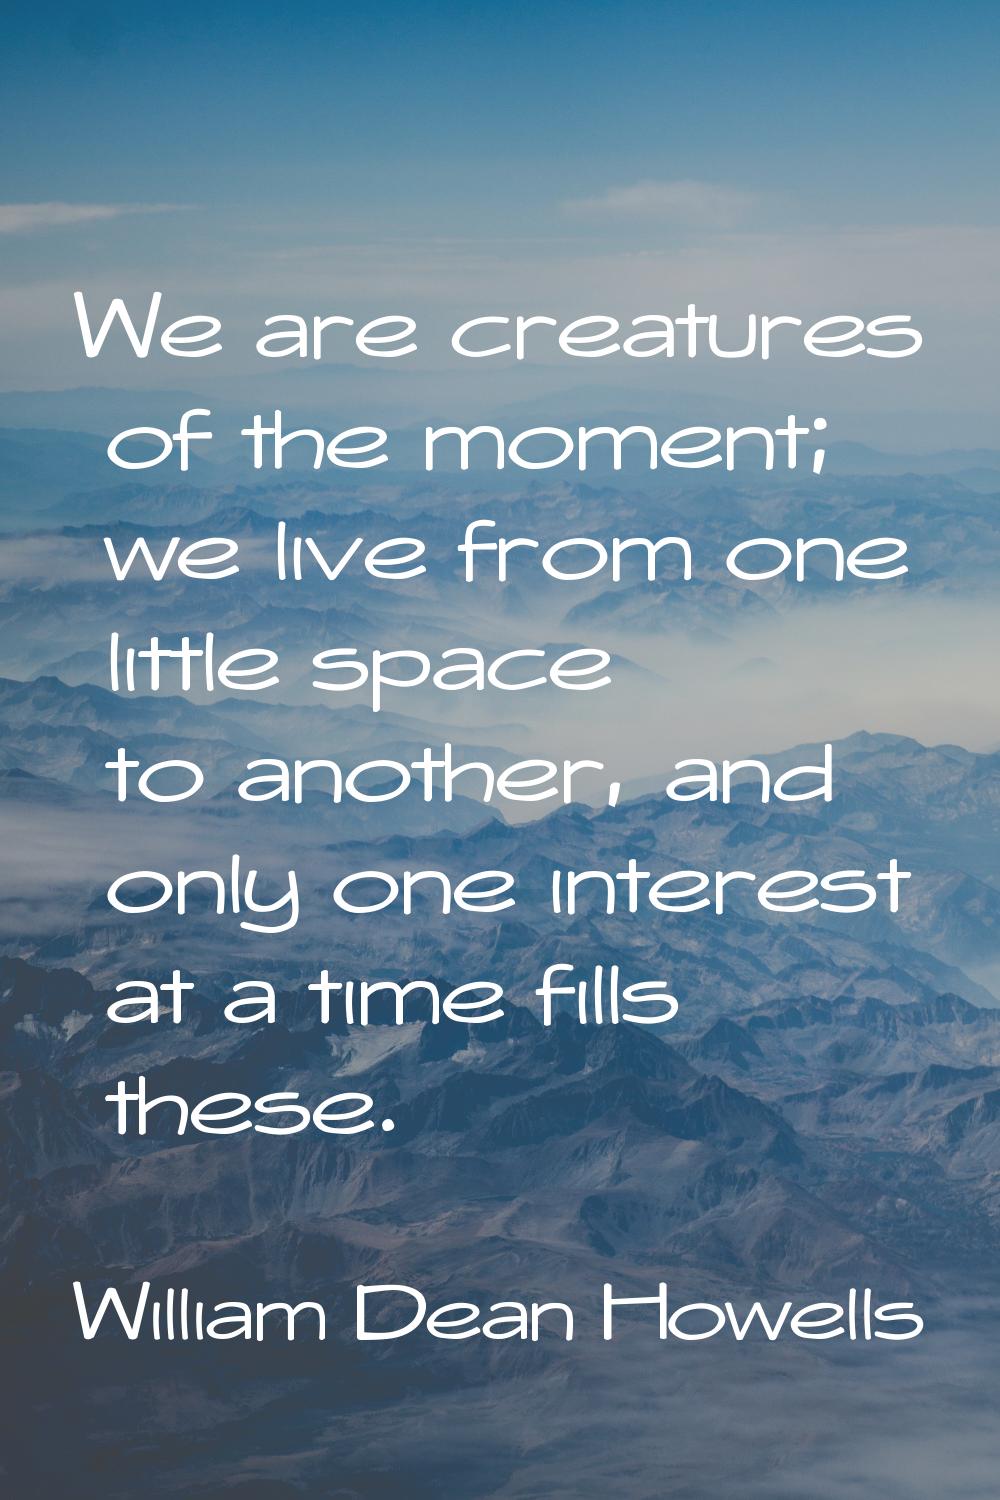 We are creatures of the moment; we live from one little space to another, and only one interest at 